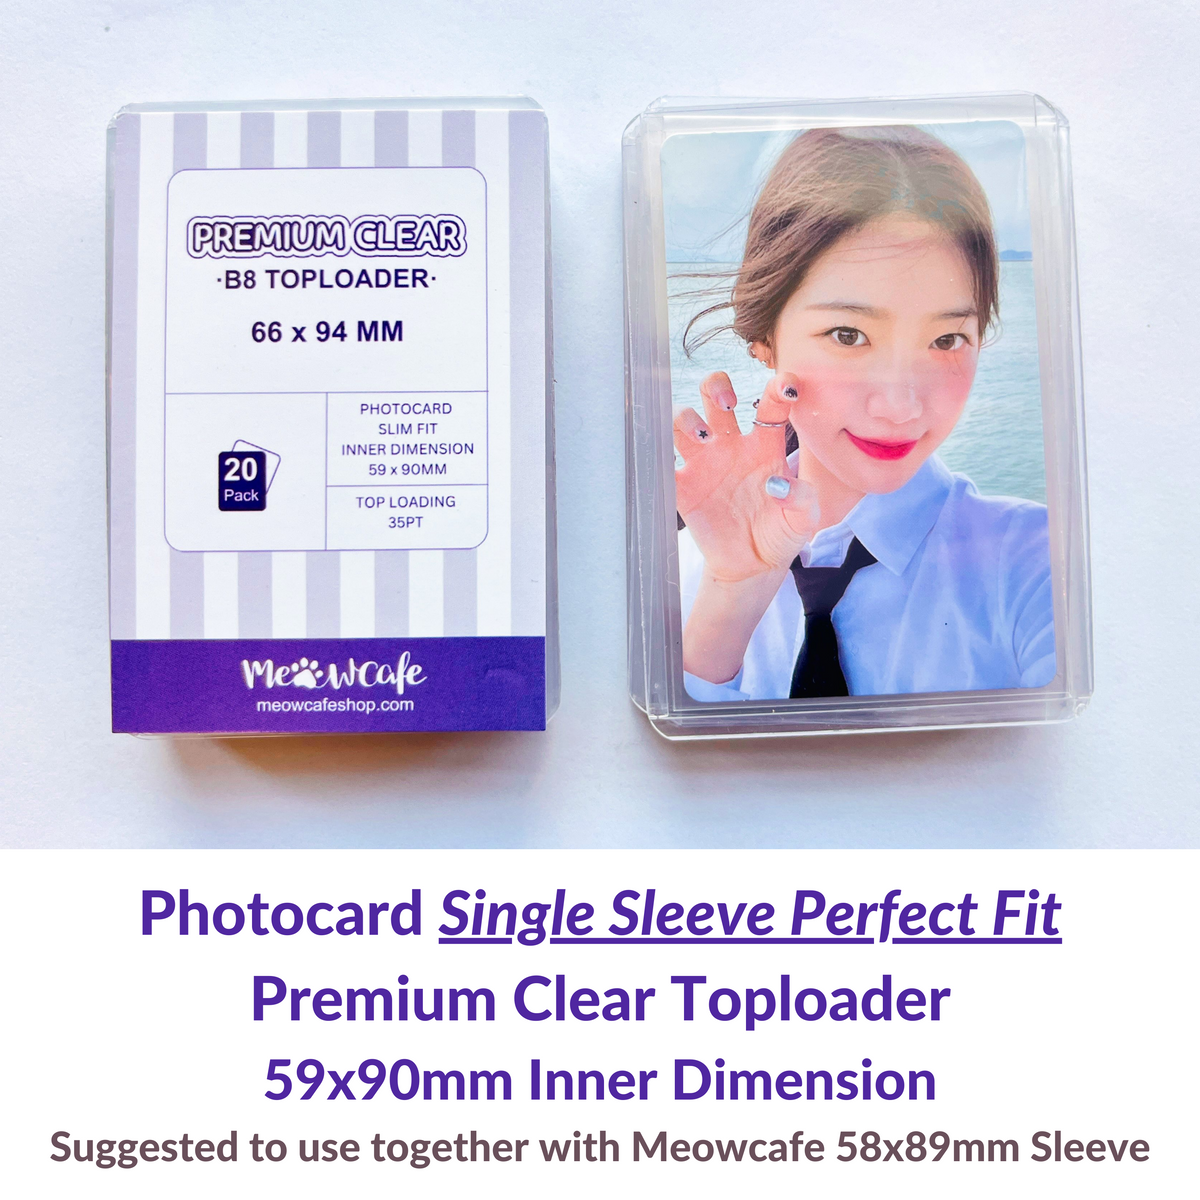 Premium Clear Toploader [Photocard Single Sleeve Perfect Fit] Inner Size 59x90MM (Pack of 20)